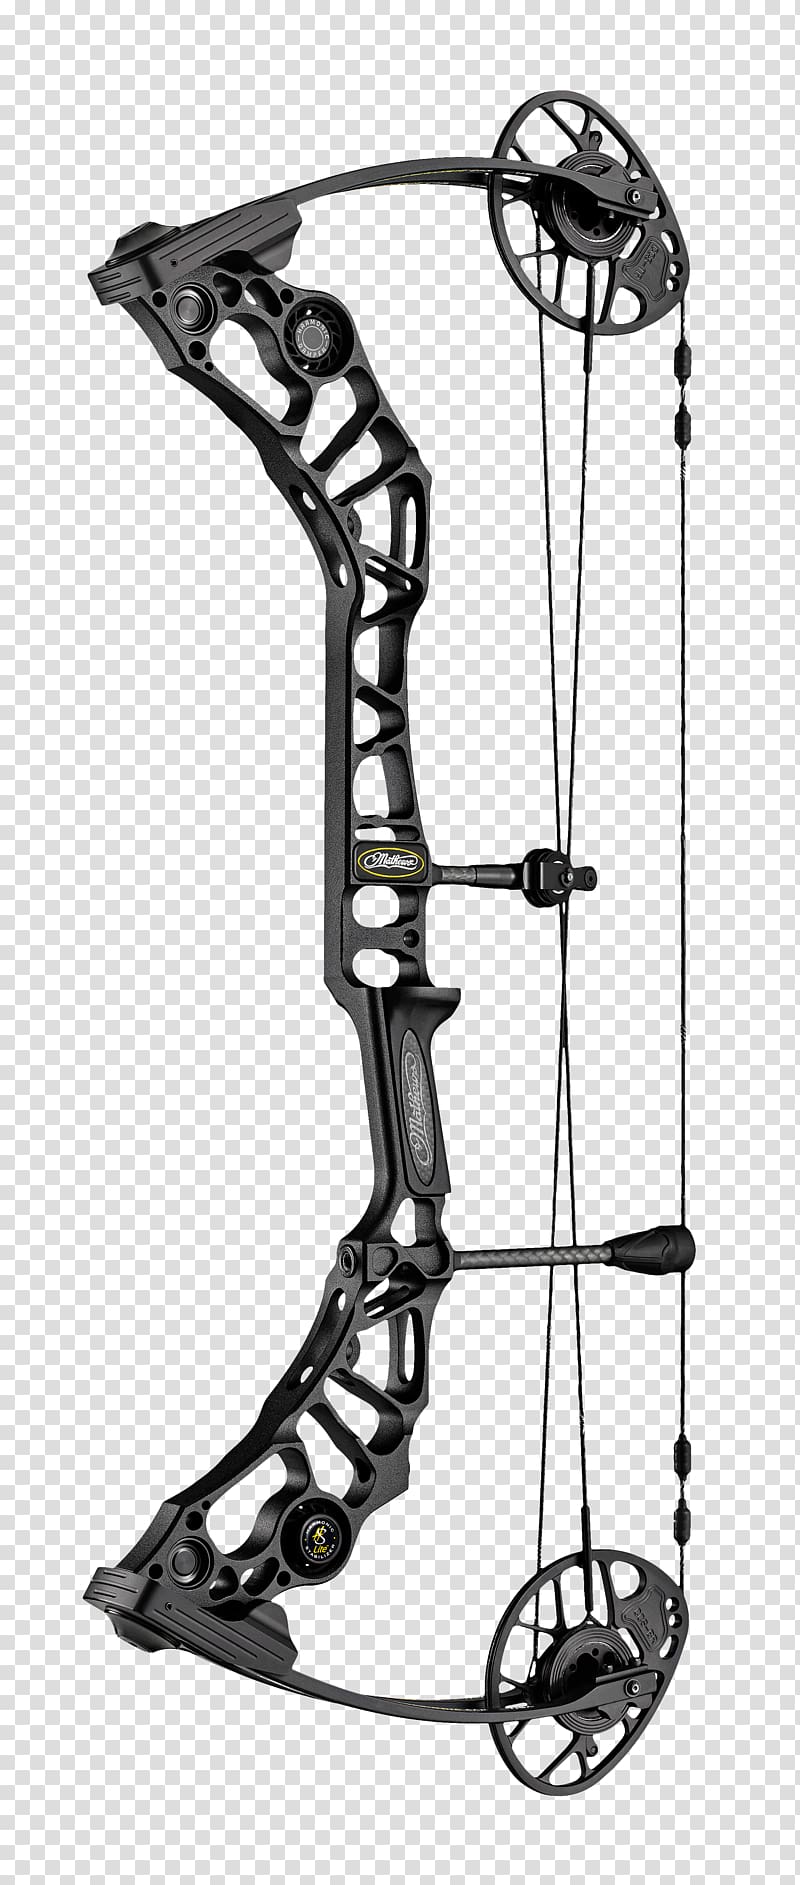 Compound Bows Bow and arrow Mathews Archery, Inc. Bowhunting, archery cover transparent background PNG clipart